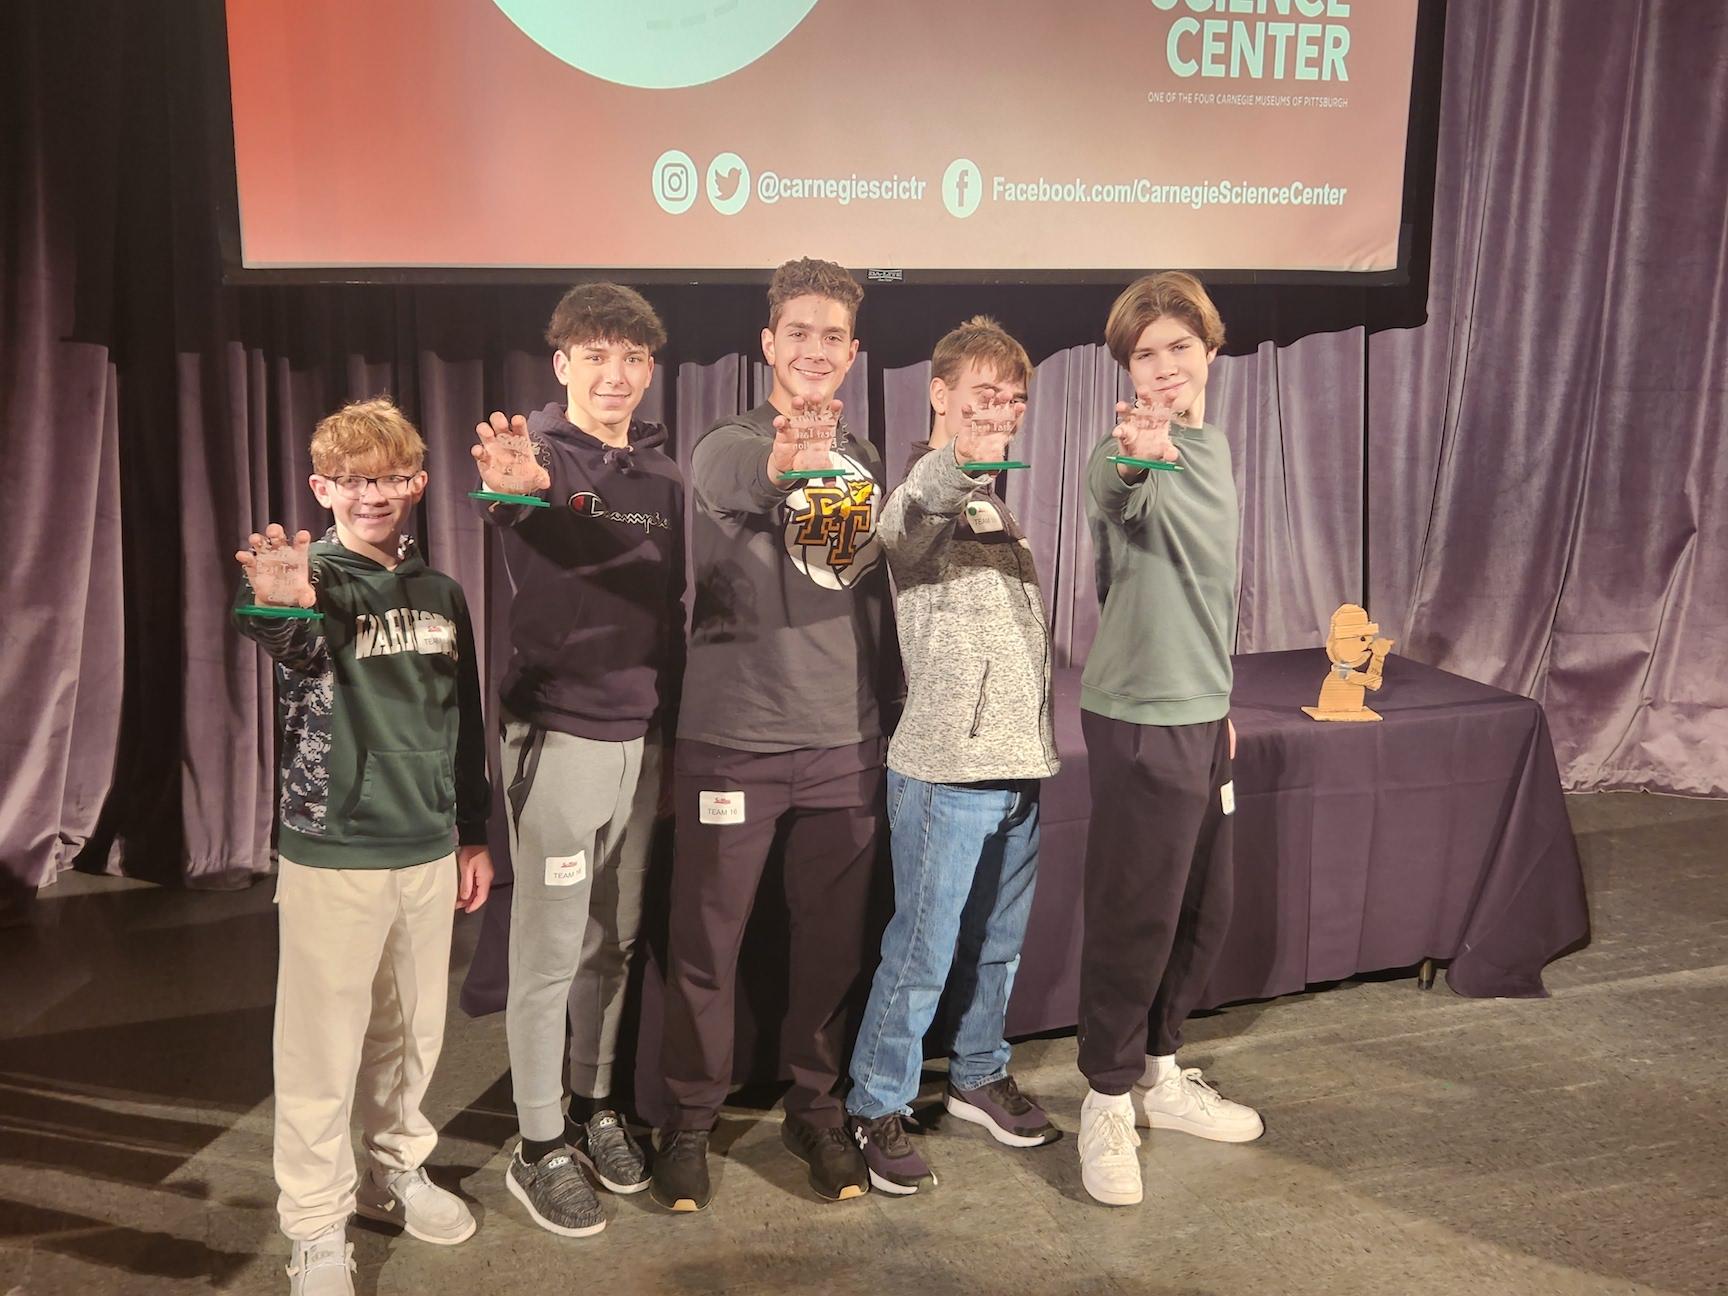 Penn-Trafford’s Team 1 earned the award for Best Execution of the Theme; (left to right) Jacob Lang, Logan Matrisch, Drew Sherwin, Eli Emahizer, Ethan Goldsworthy